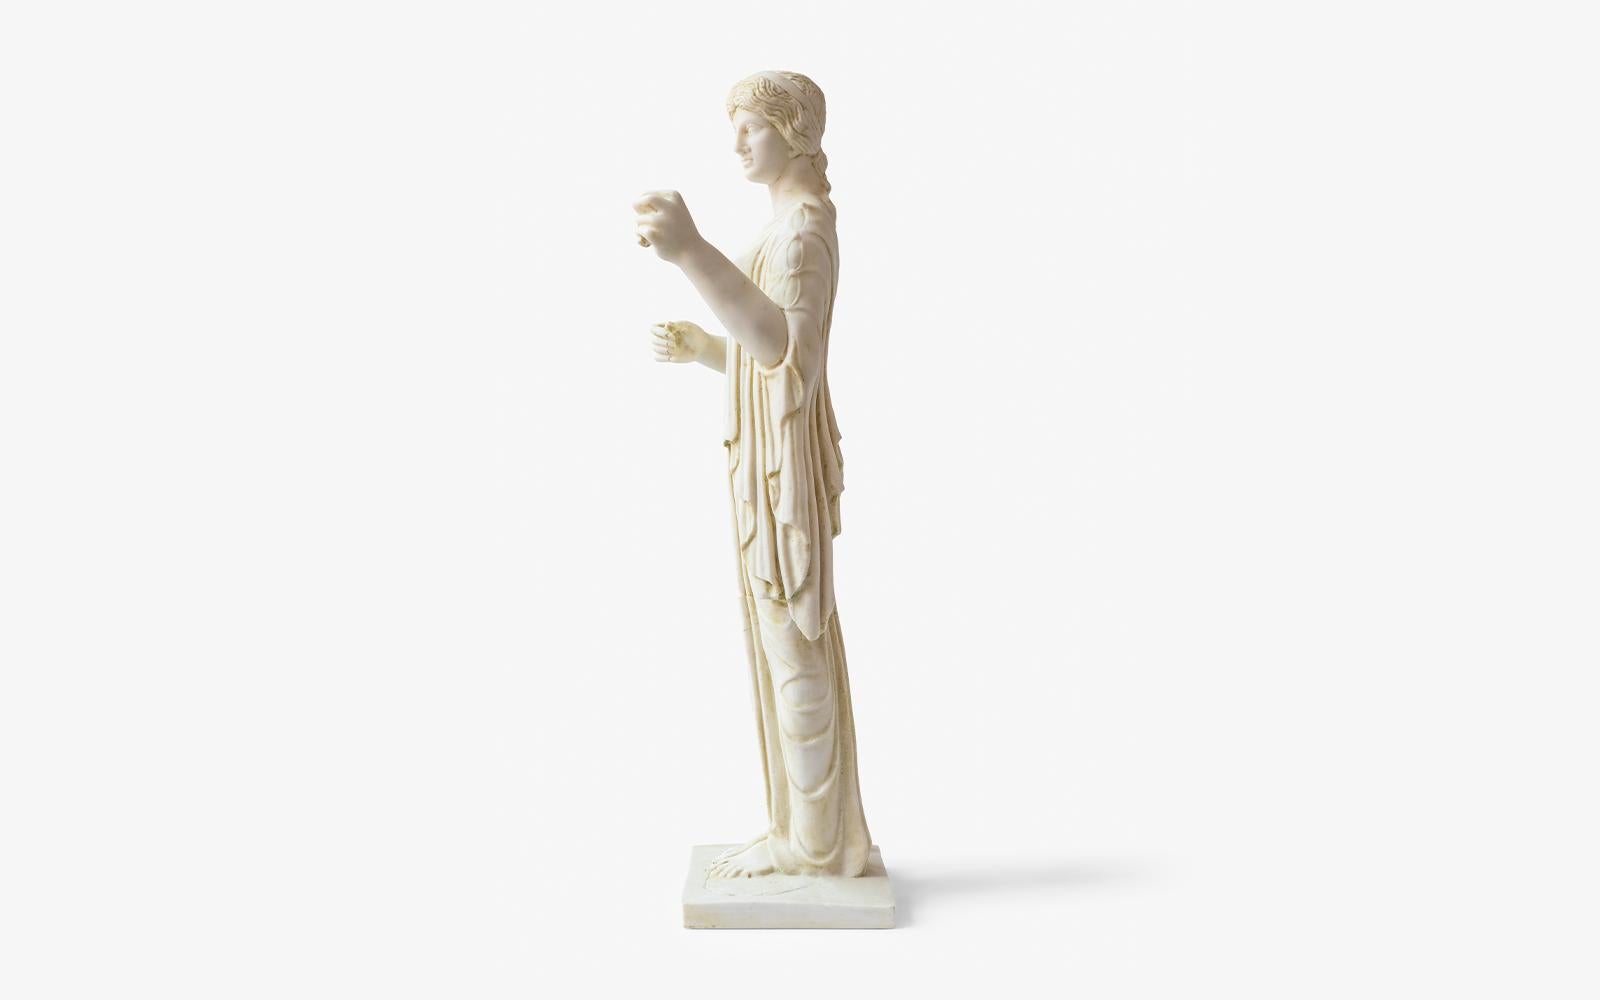 -Weight: 20 kg.
-Produced from pressed marble powder.
-Produced from the original molds of the works from the museum.
-Can be used indoors and outdoors.

Artemis is known as the goddess of 